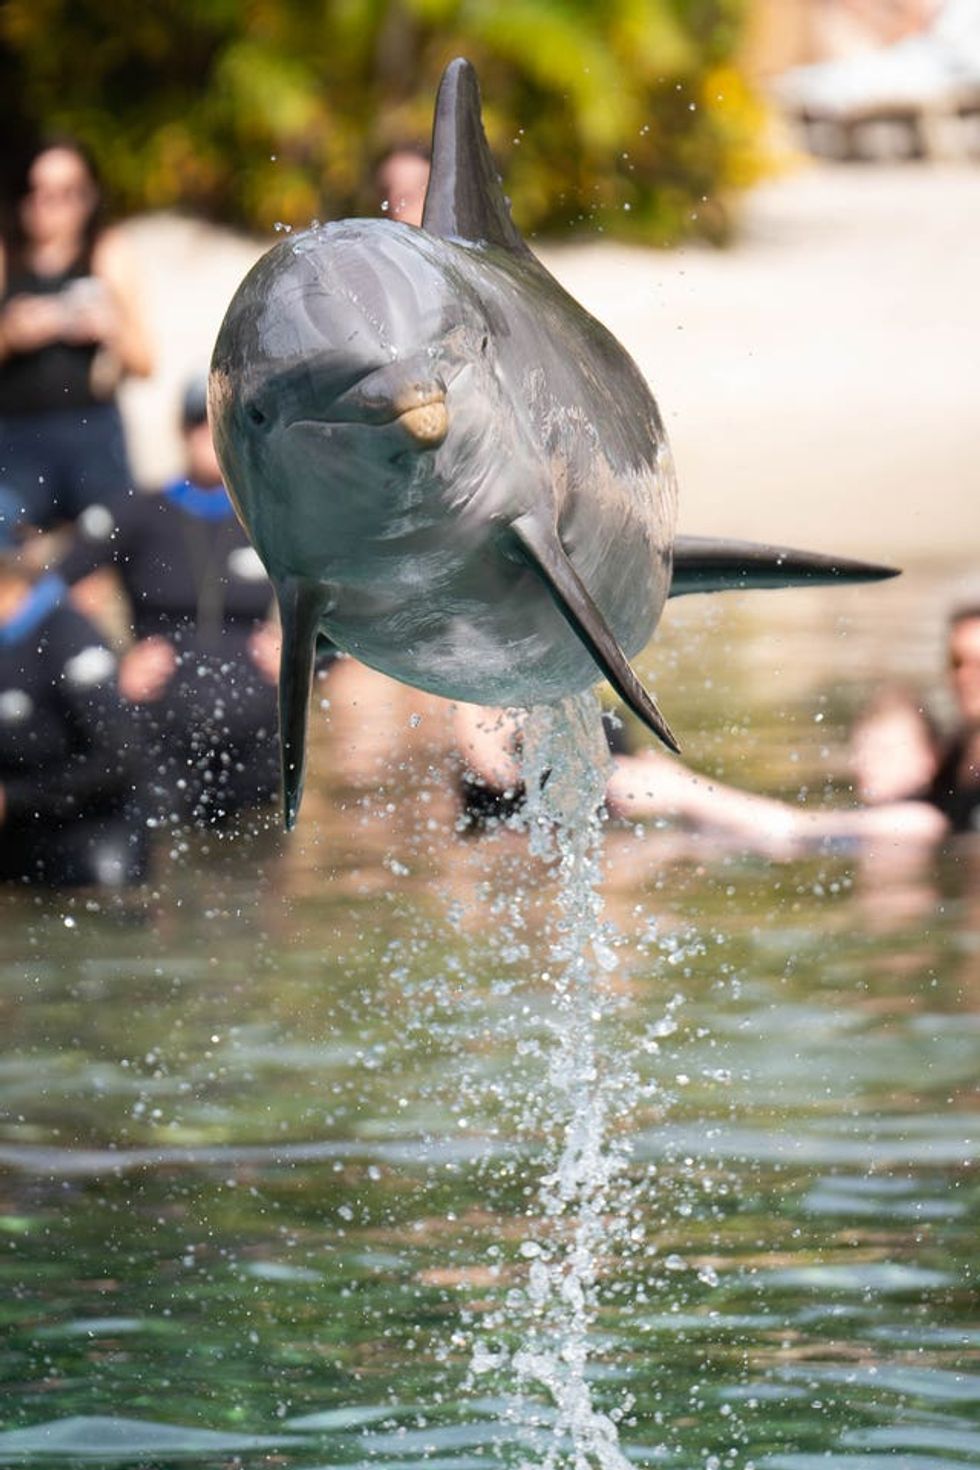 A dolphin dives out of the water during the Dreamflight visit to Discovery Cove in Orlando, Florida